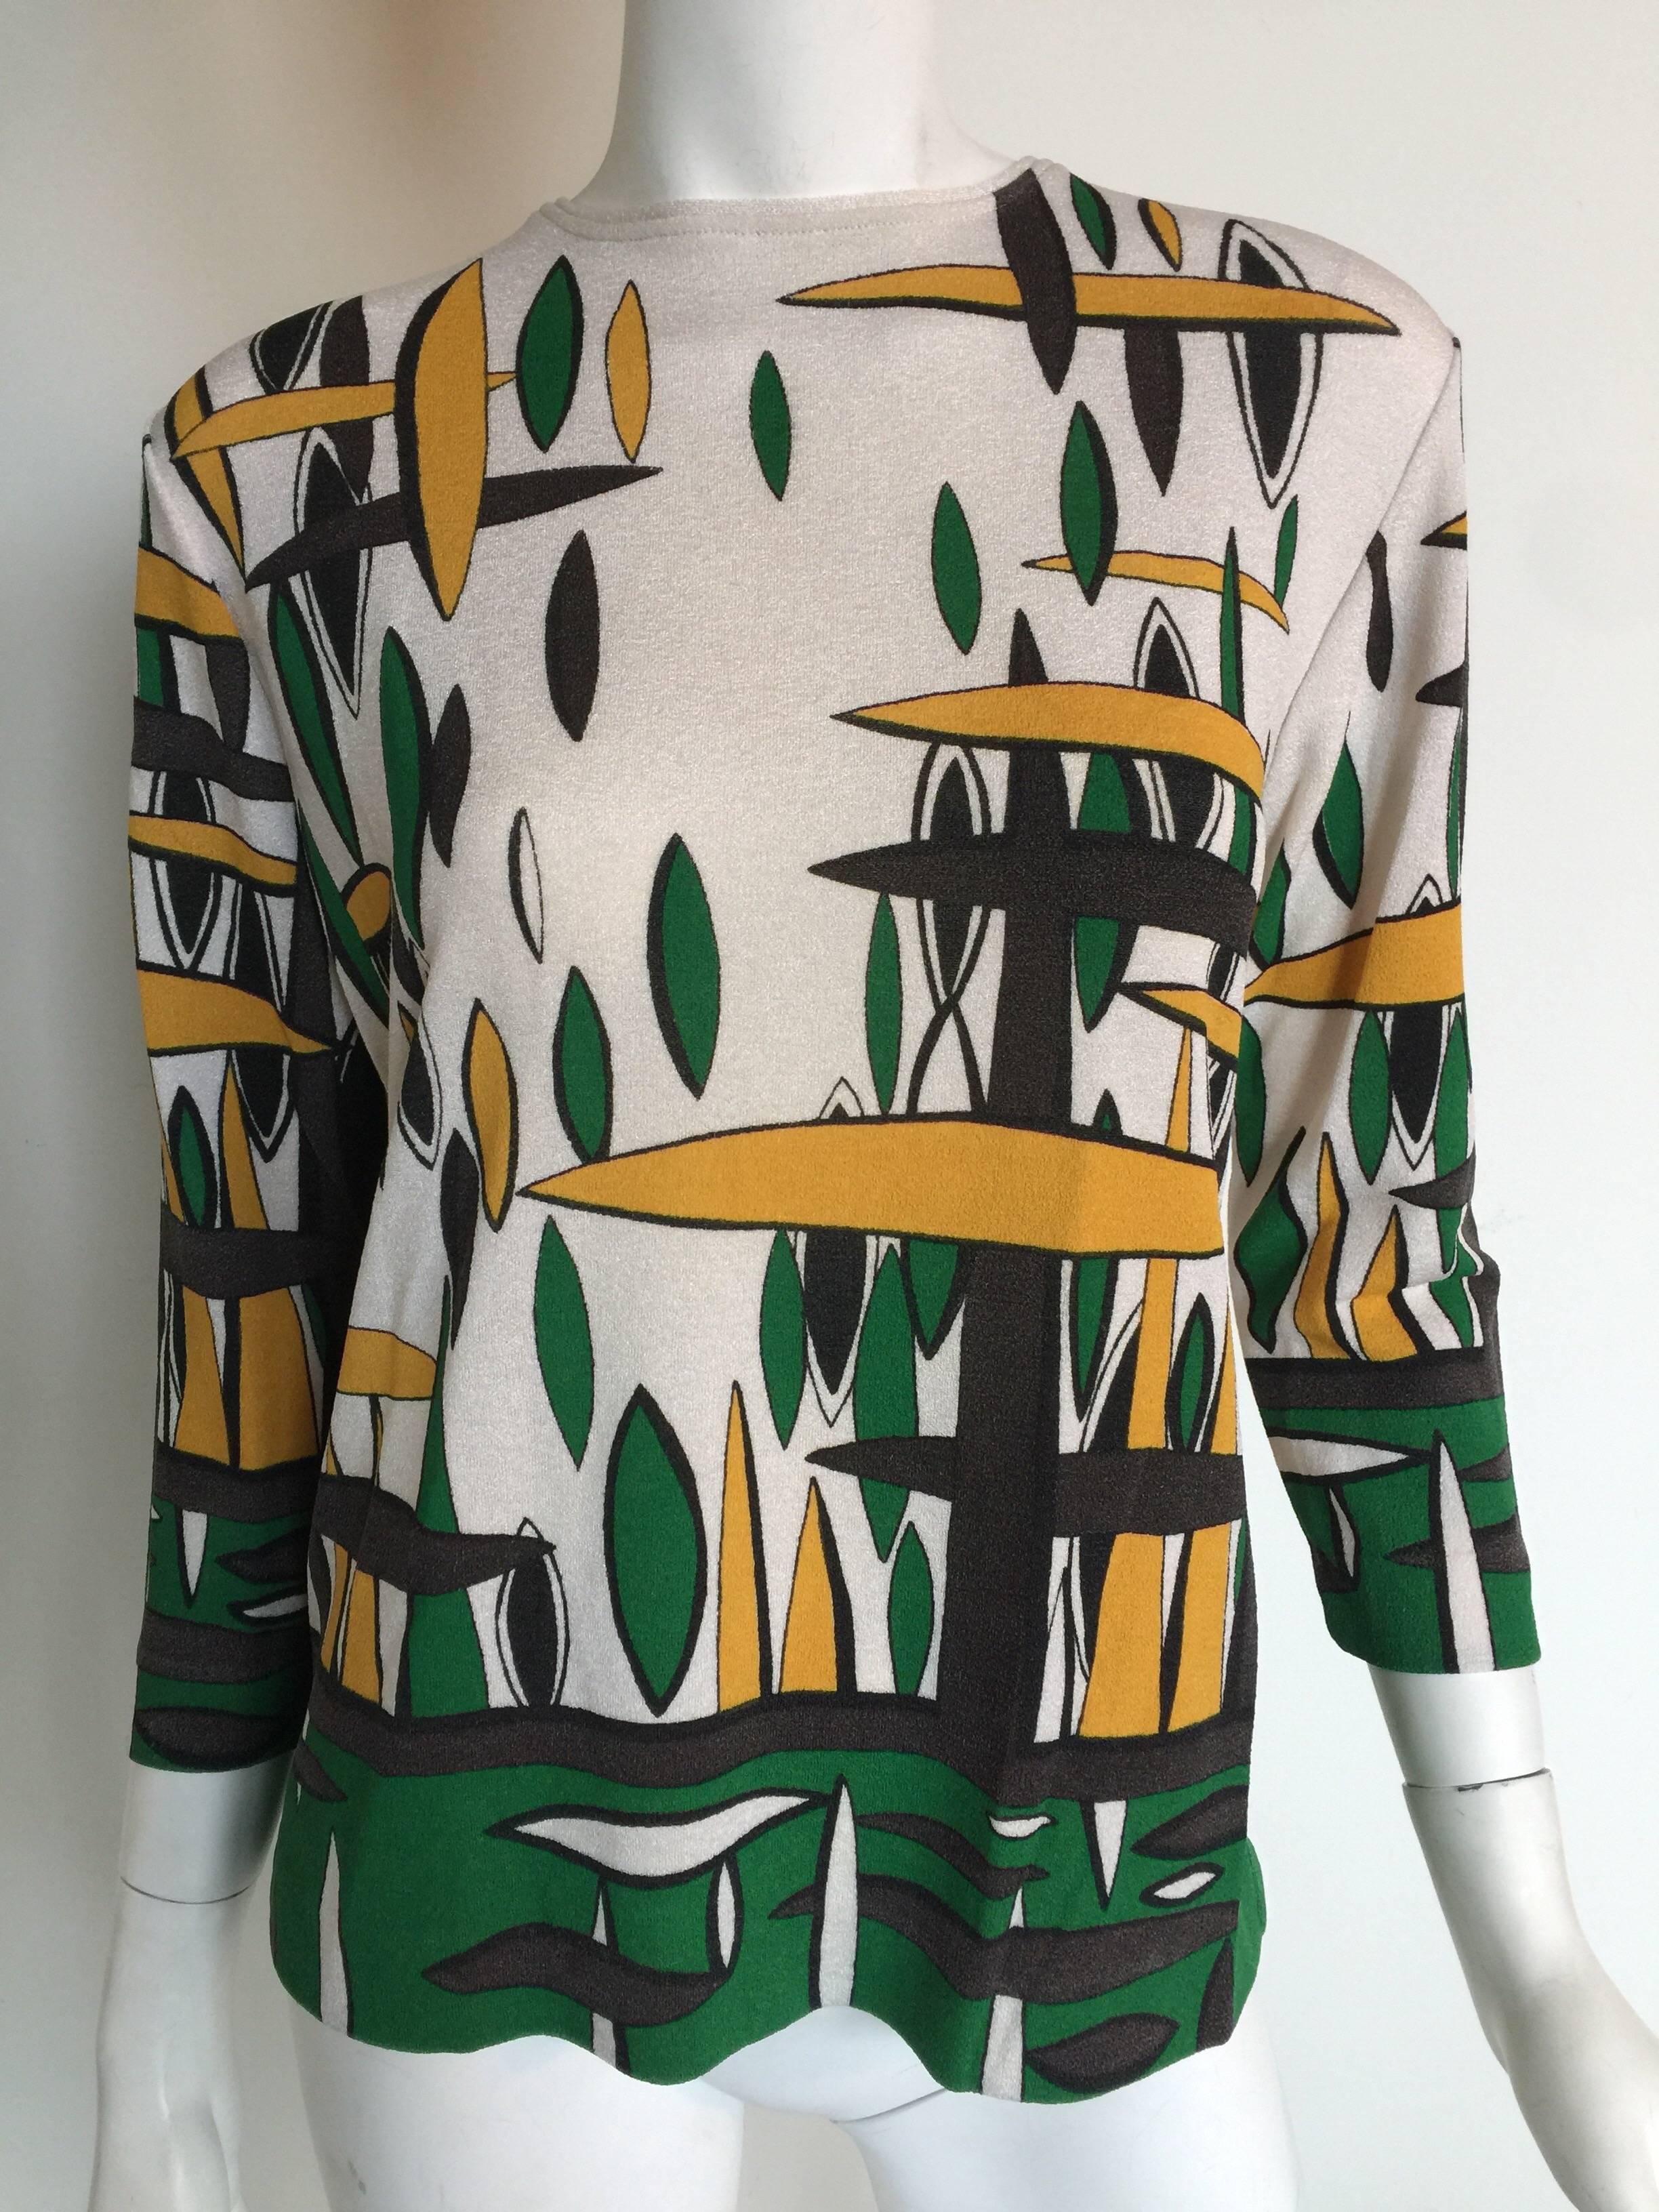 This 1970s polyester blend shirt has a cool mod print.  It is a great vintage top.